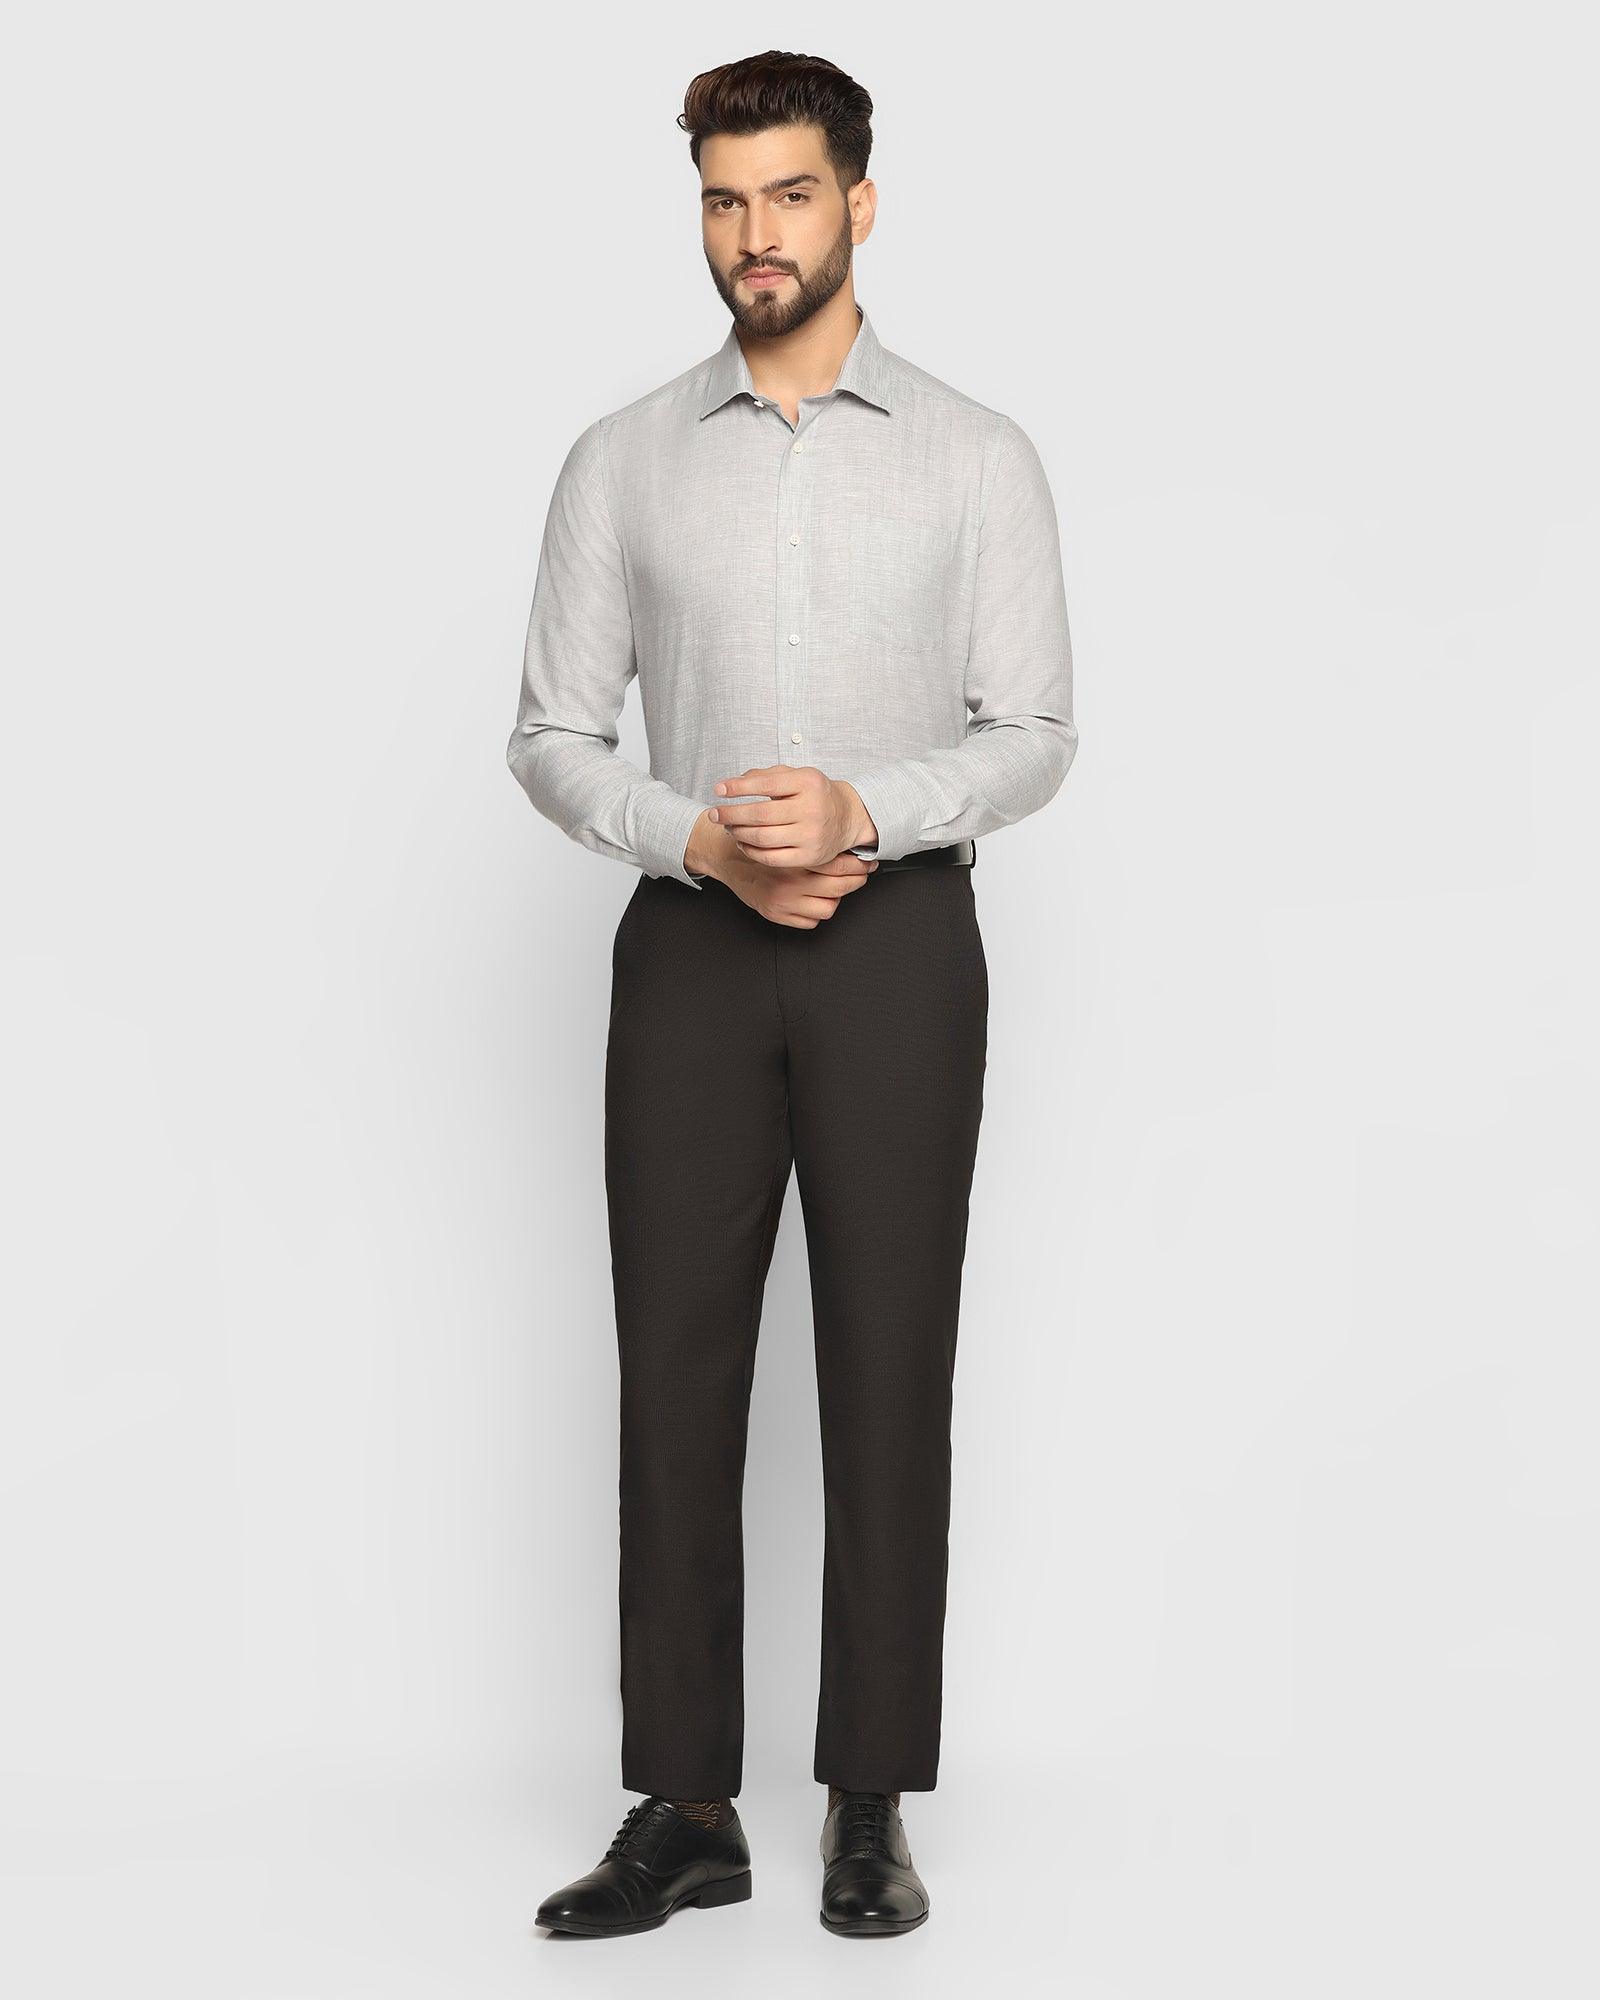 What color shirt goes with grey pants and black shoes for a man? - Quora